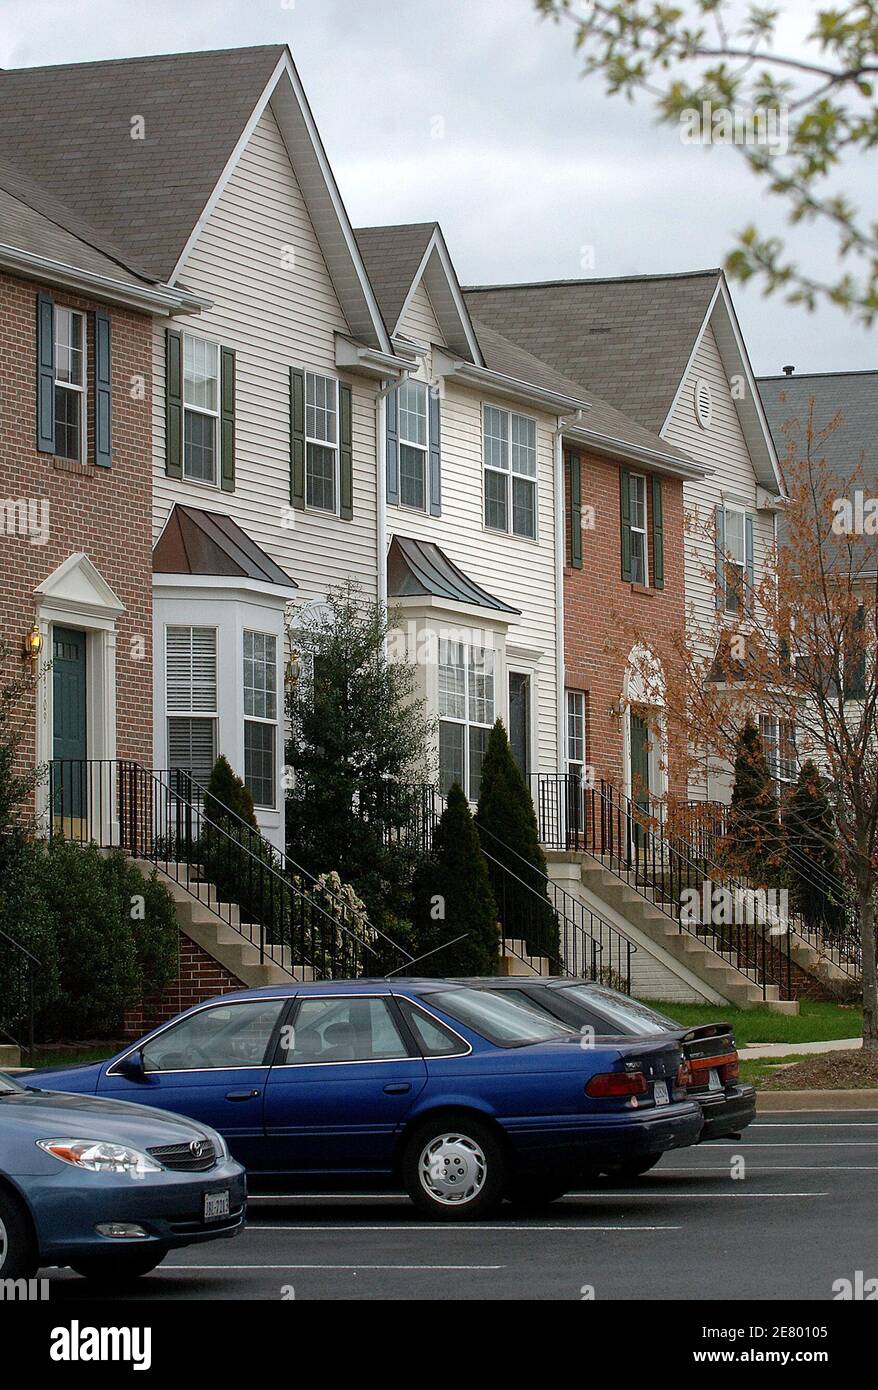 A view of the townhouse (center) where Cho Seung-Hui lived in Centreville, VA, USA on April 18, 2007. Officials have named Seung-Hui, the 23-year-old South Korean native, as the suspect in the killing rampage at Virginia Tech yesterday killing 32 and self. Photo by Olivier Douliery/ABACAPRESS.COM Stock Photo